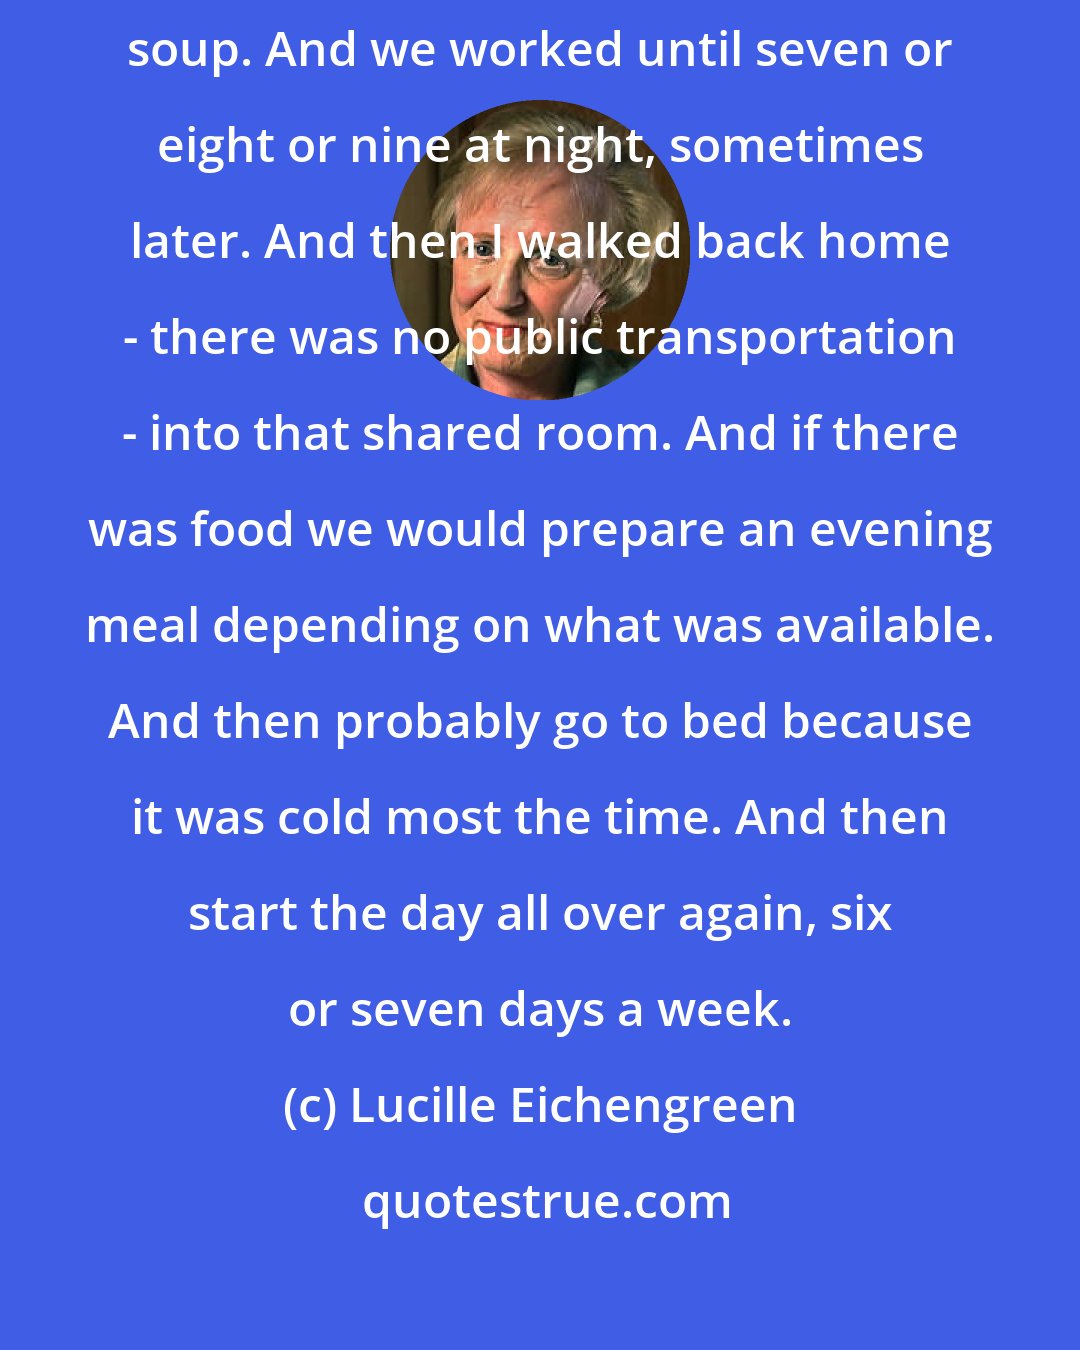 Lucille Eichengreen: I went to work at seven in the morning. Around noon time we got the watery soup. And we worked until seven or eight or nine at night, sometimes later. And then I walked back home - there was no public transportation - into that shared room. And if there was food we would prepare an evening meal depending on what was available. And then probably go to bed because it was cold most the time. And then start the day all over again, six or seven days a week.